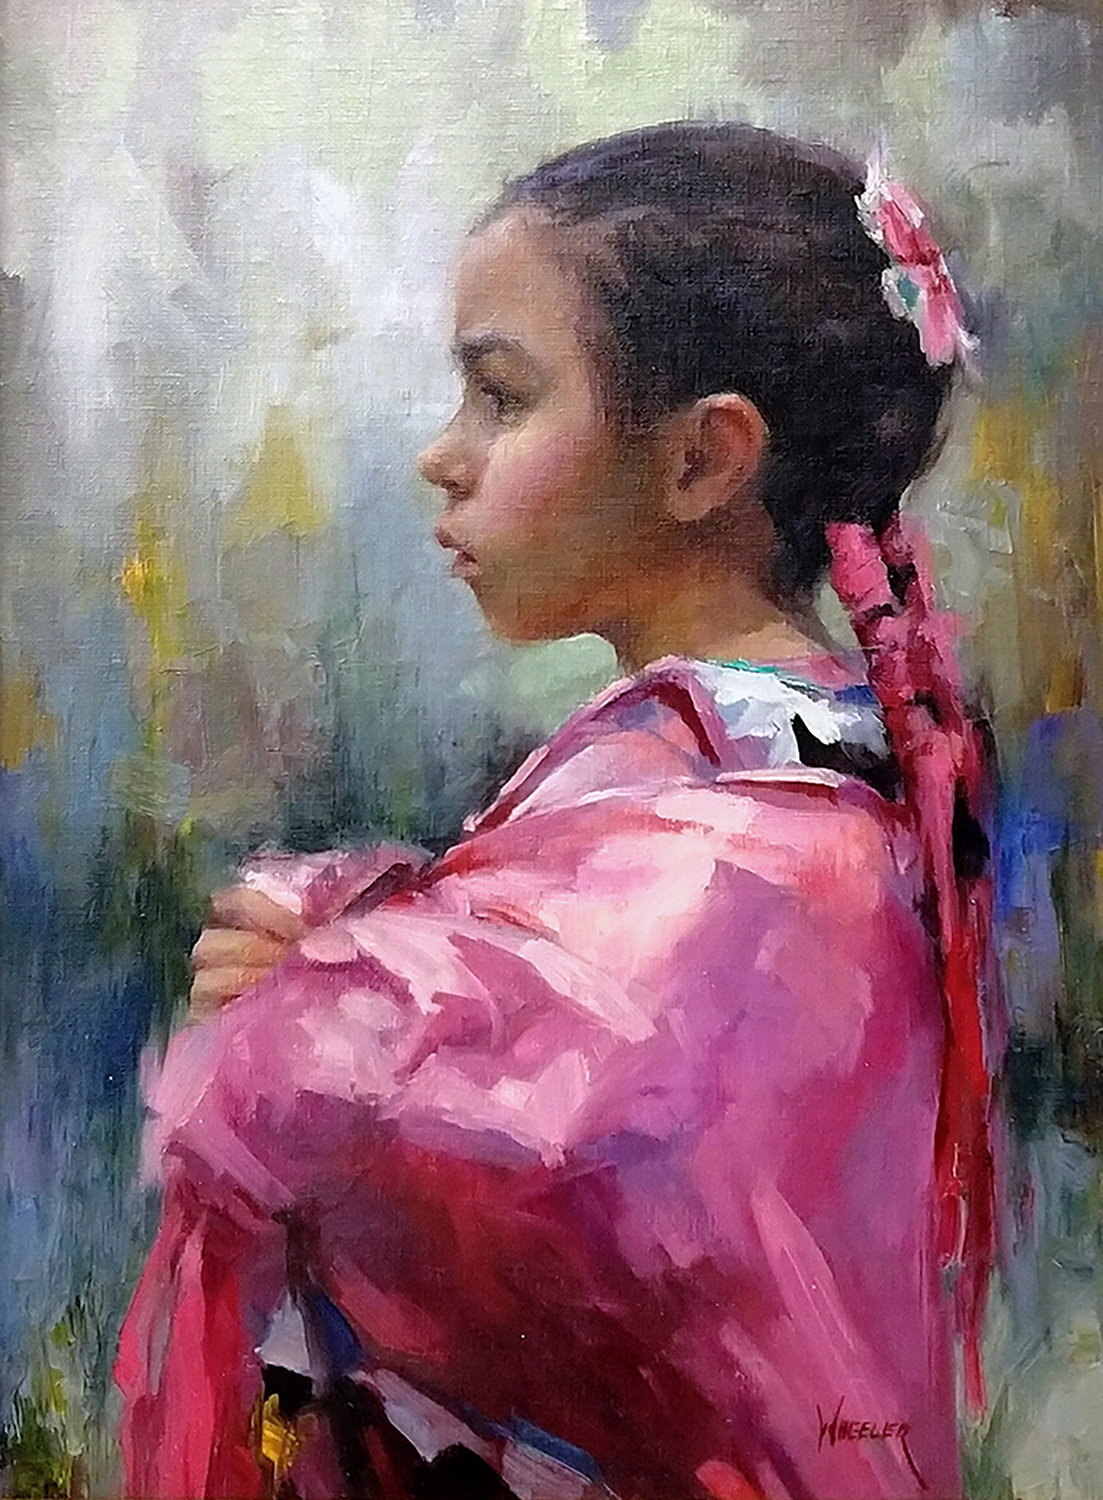 "Pretty in Pink" by Kathie Wheeler